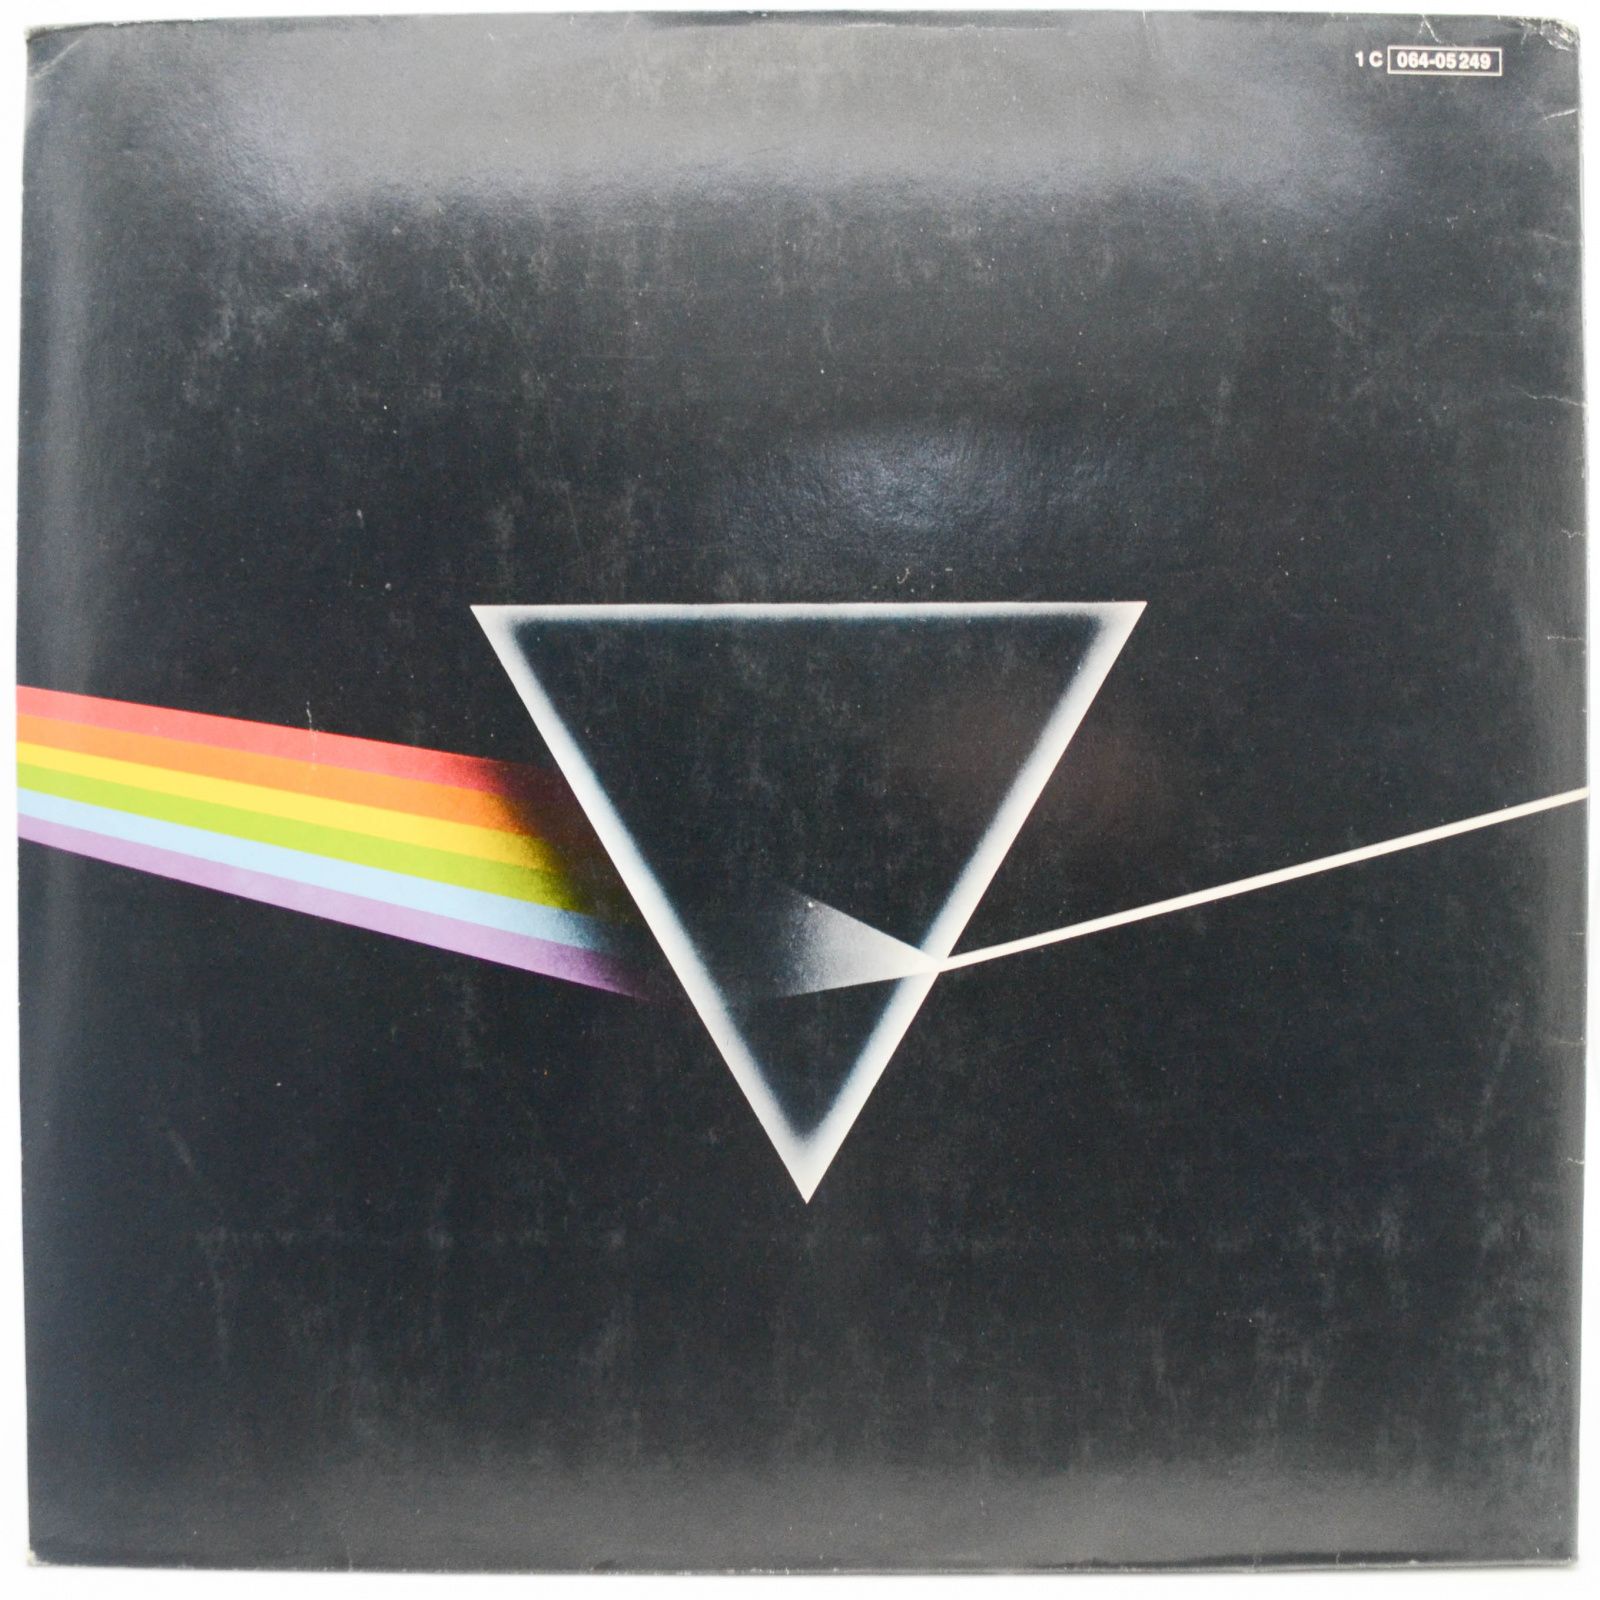 Pink Floyd — The Dark Side Of The Moon (1 poster), 1973